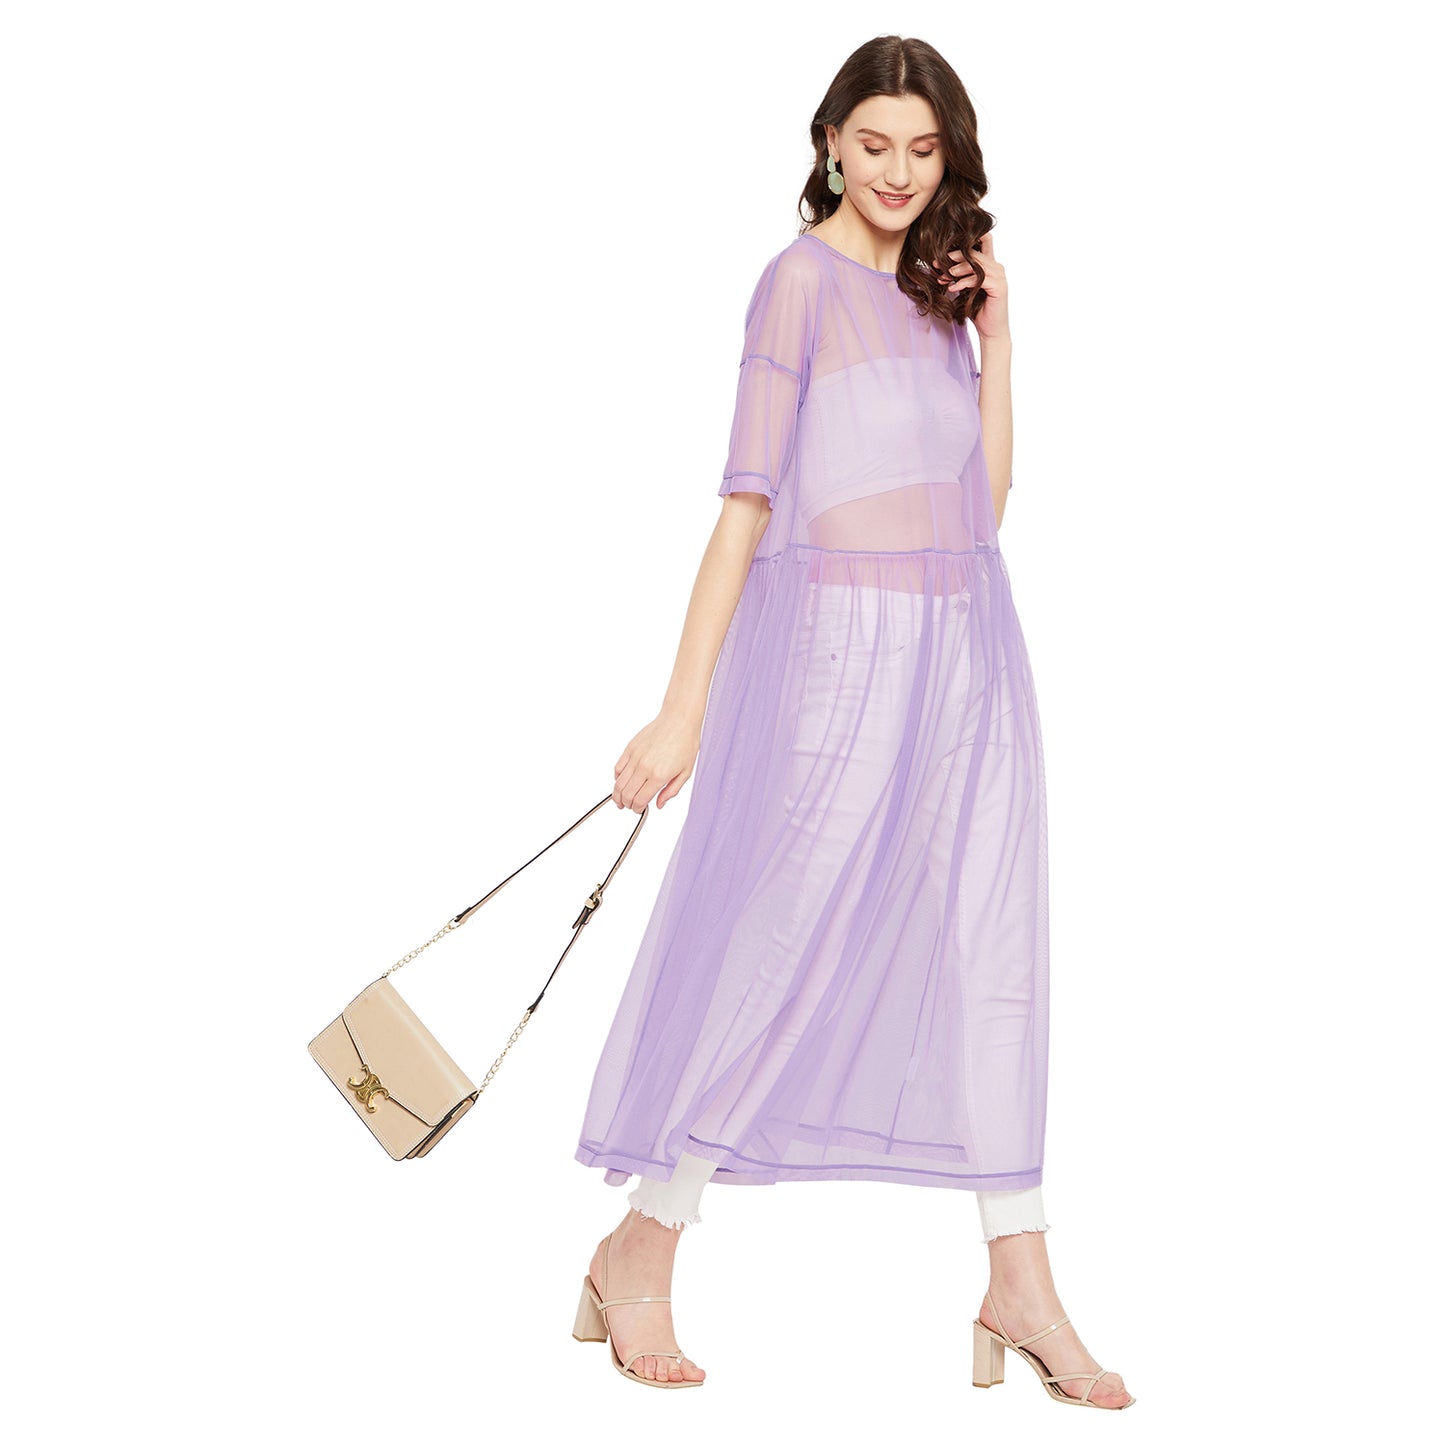 LY2 Sheer Lilac Tulle Dress